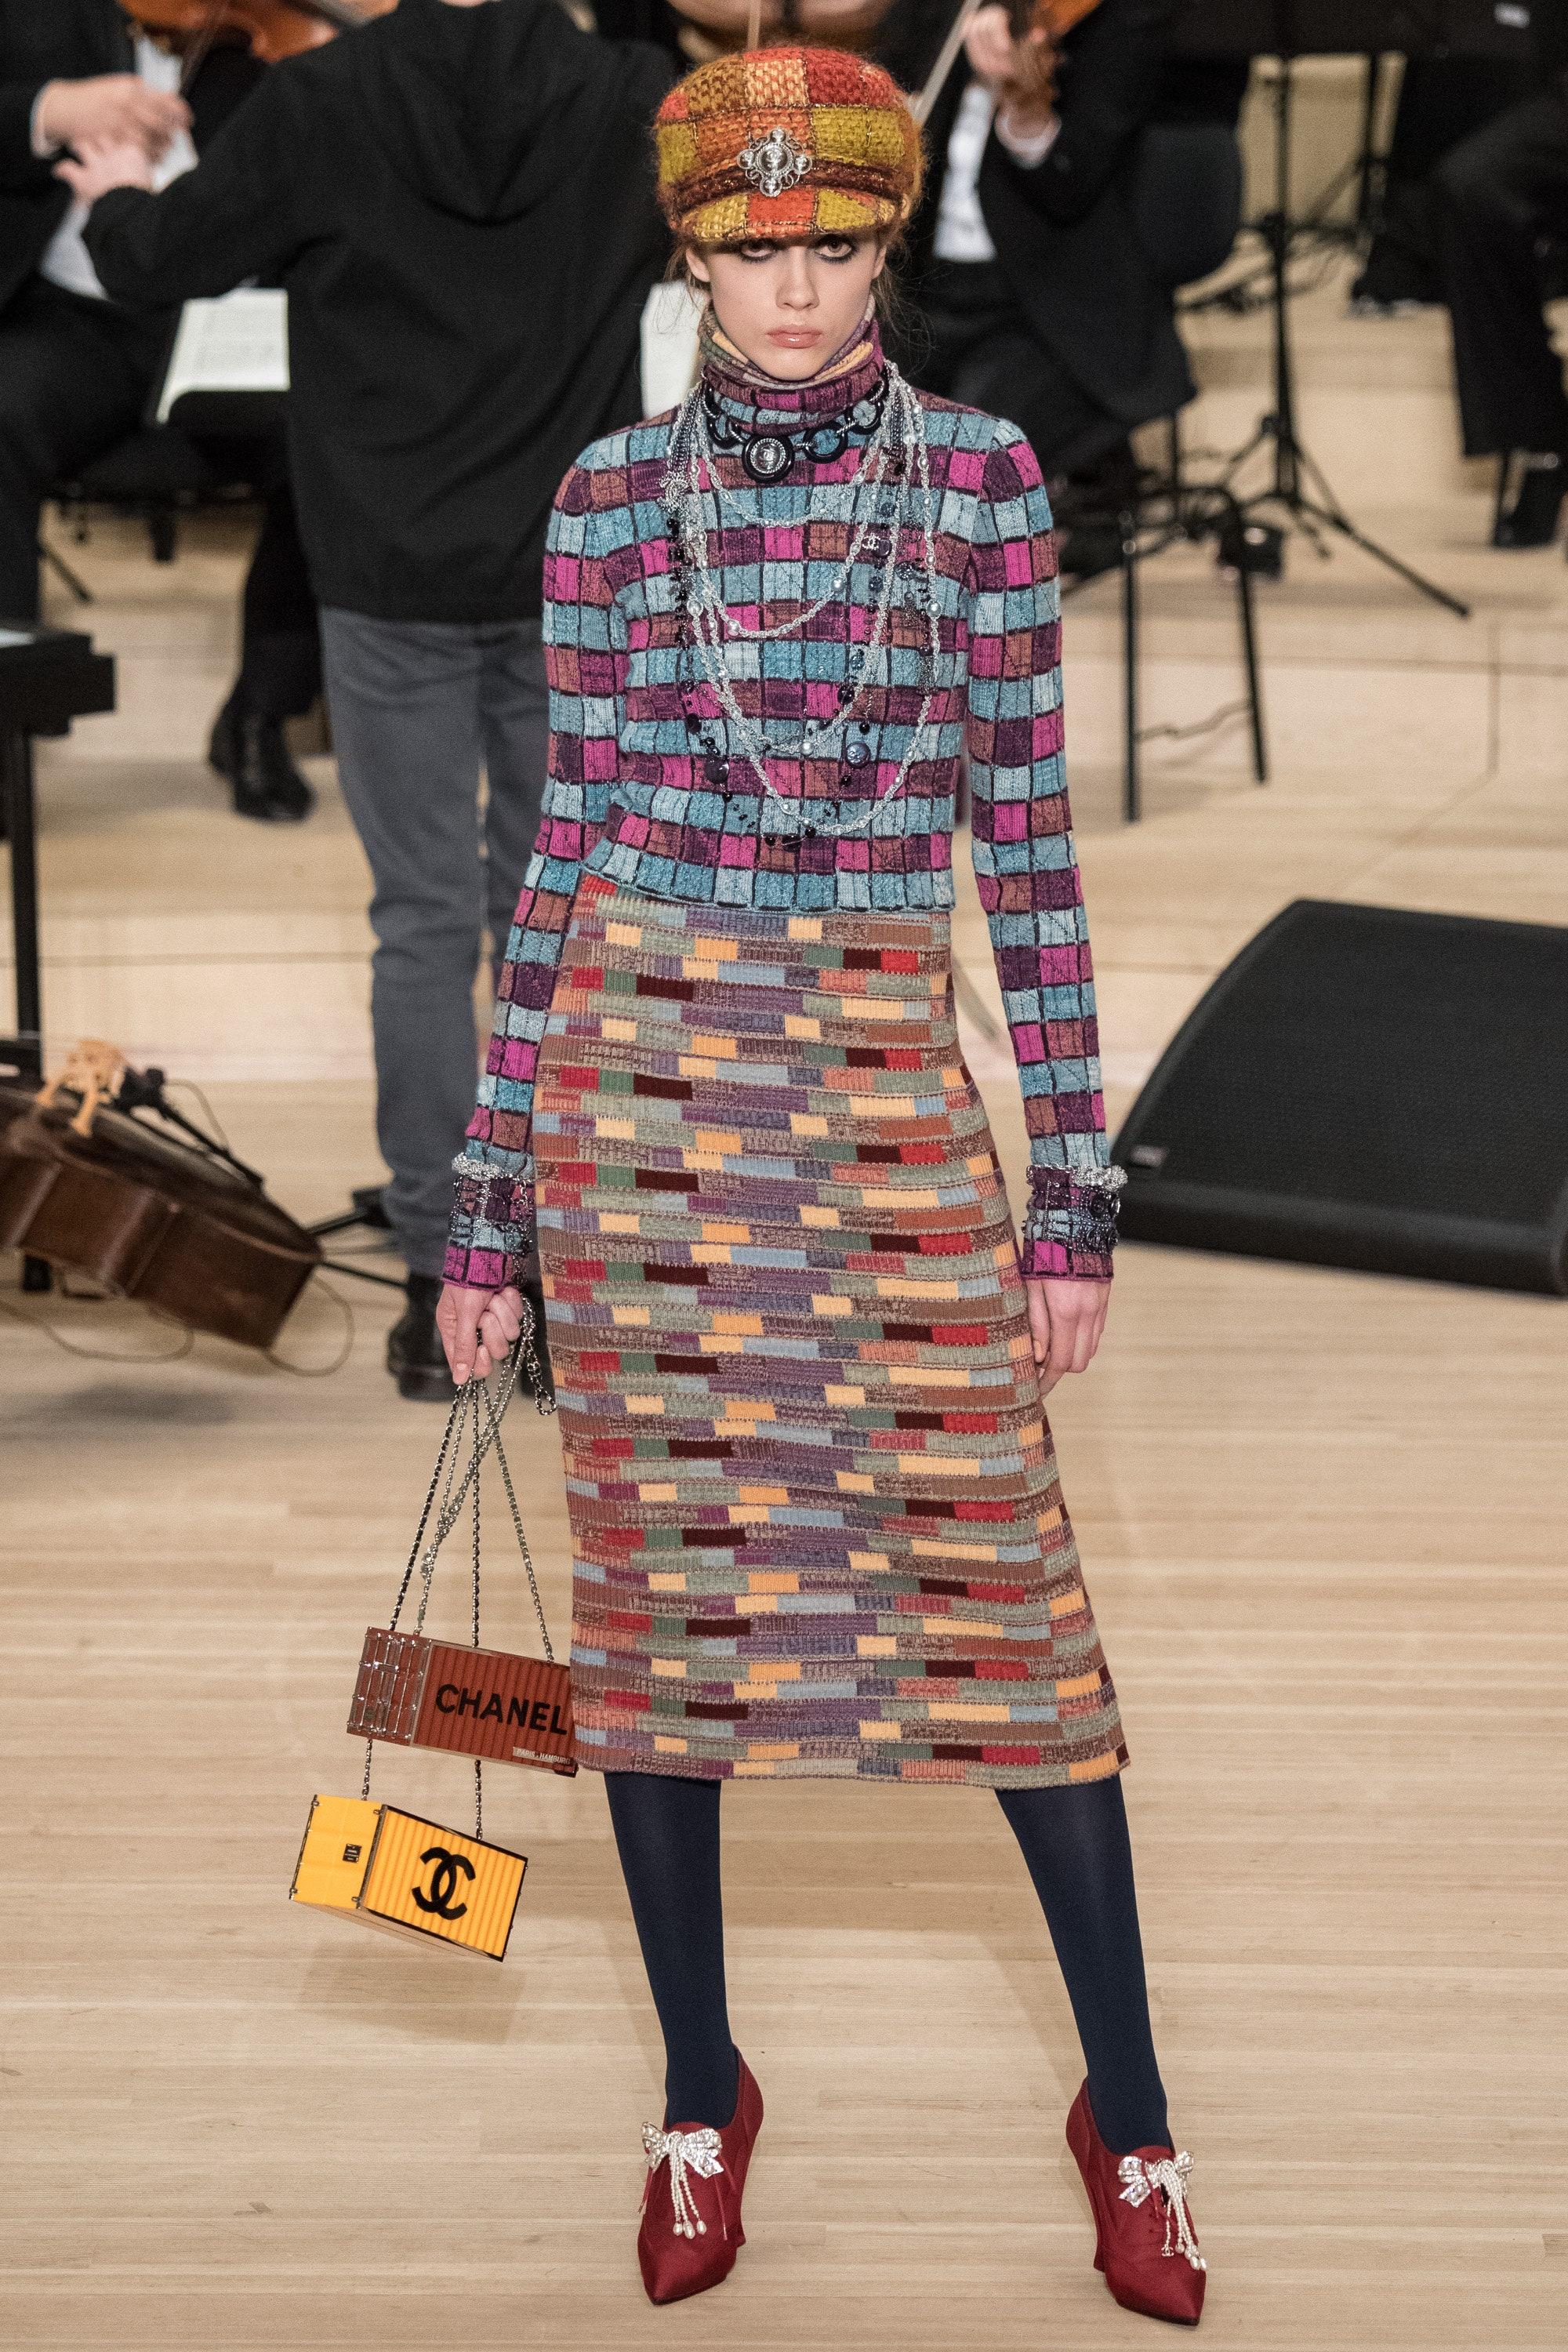 Iconic “bricks” cashmere dress from Runway of Paris / HAMBURG Metiers d’Art Collection , 2018 Pre-Fall Metiers d'Art
Same style Chanel dress As seen on Jennifer Lopez
Colors like a masterpiece 
- CC logo charm at waist
Size mark 42 fr, condition is